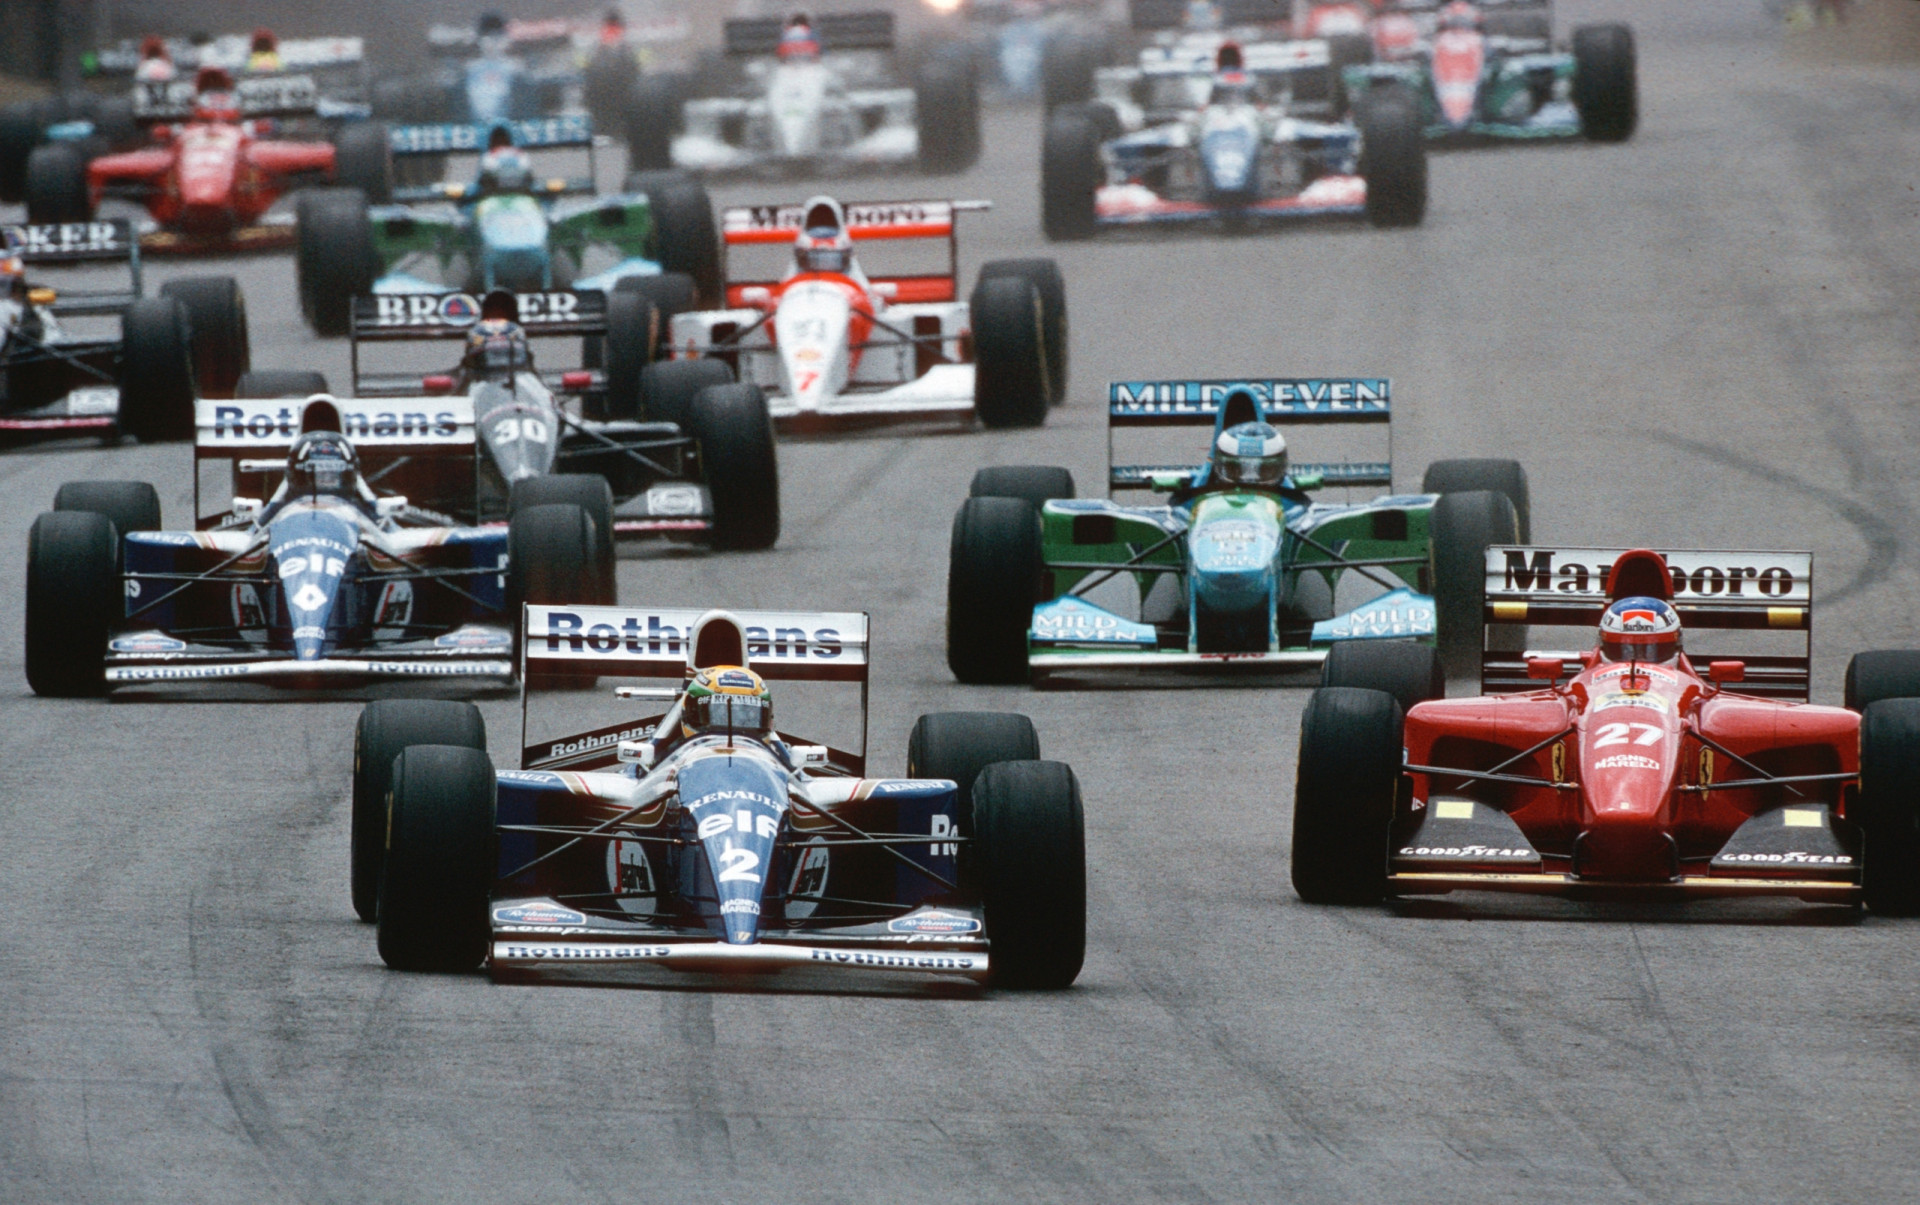 <p>The 1994 world championship commenced in Brazil. Senna quickly expressed dissatisfaction with his car's performance and found himself in close running with the Benetton B194 of Michael Schumacher. Senna, Jean Alesi, Damon Hill, and Michael Schumacher are pictured at the start of the Grand Prix of Brazil at Interlagos on March 27, 1994.</p><p><a href="https://www.msn.com/en-us/community/channel/vid-7xx8mnucu55yw63we9va2gwr7uihbxwc68fxqp25x6tg4ftibpra?cvid=94631541bc0f4f89bfd59158d696ad7e">Follow us and access great exclusive content every day</a></p>